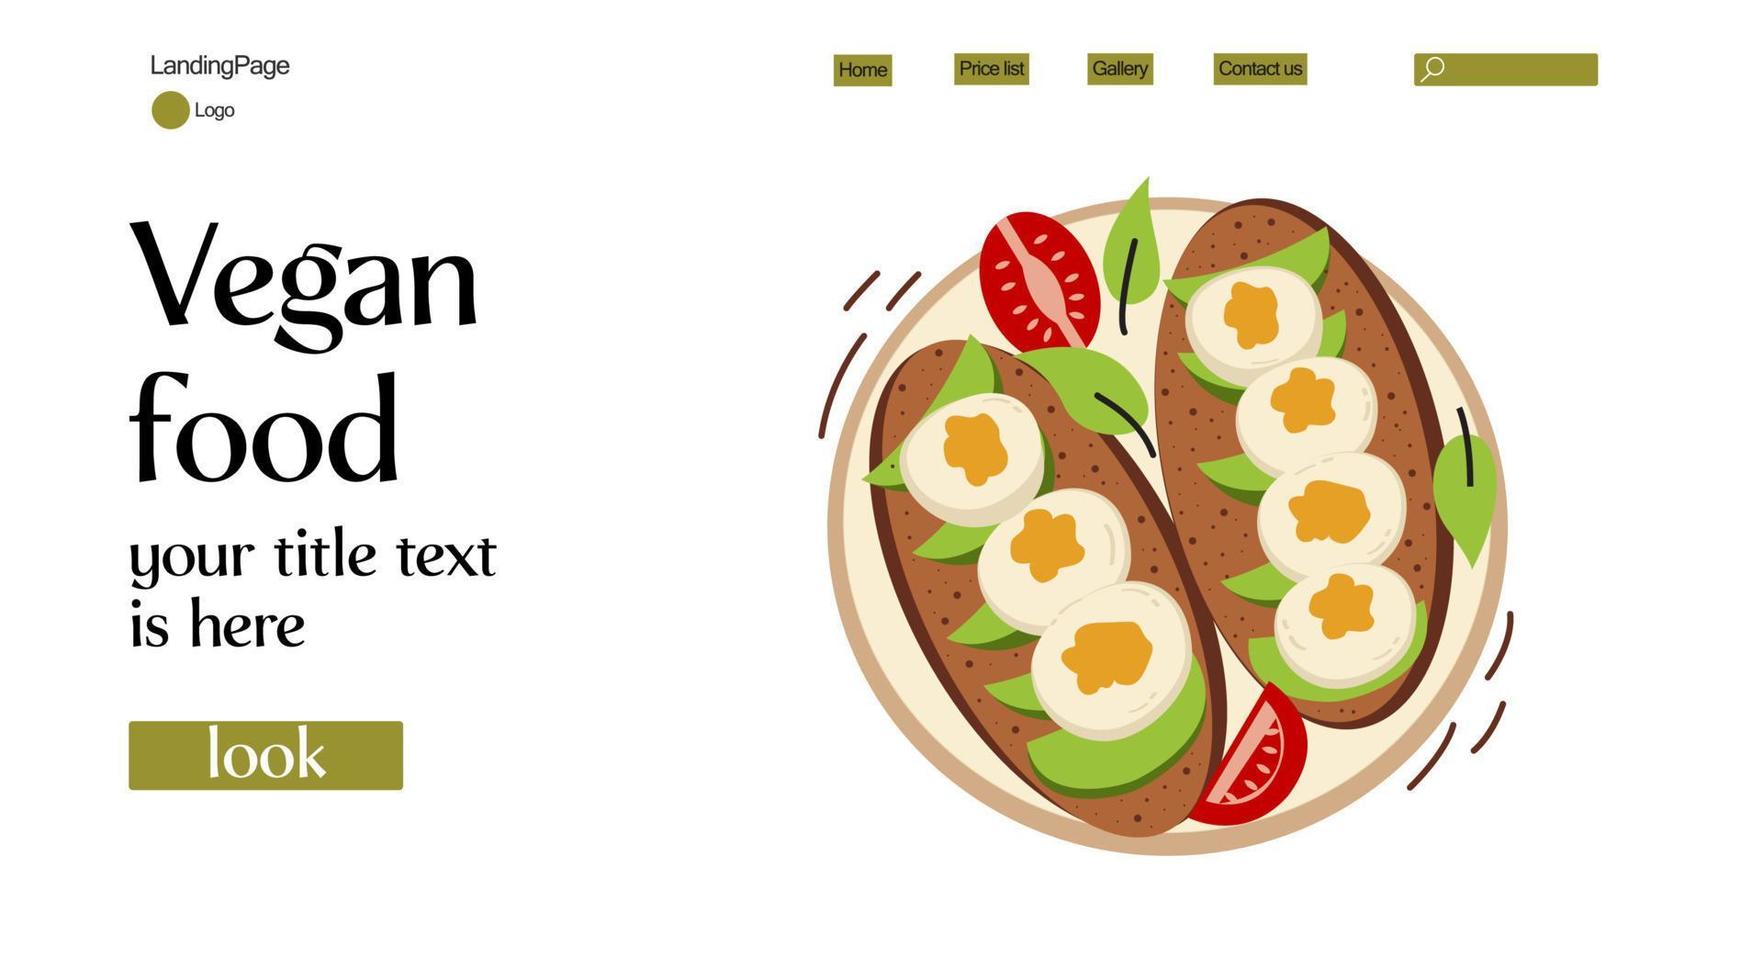 Vegan food website background. Isolated fruit and vegetable salad plate icon. Avocado toast with fresh slices of ripe avocado, eggs, seasoning and dill, tomato. Delicious avocado sandwich. Vector